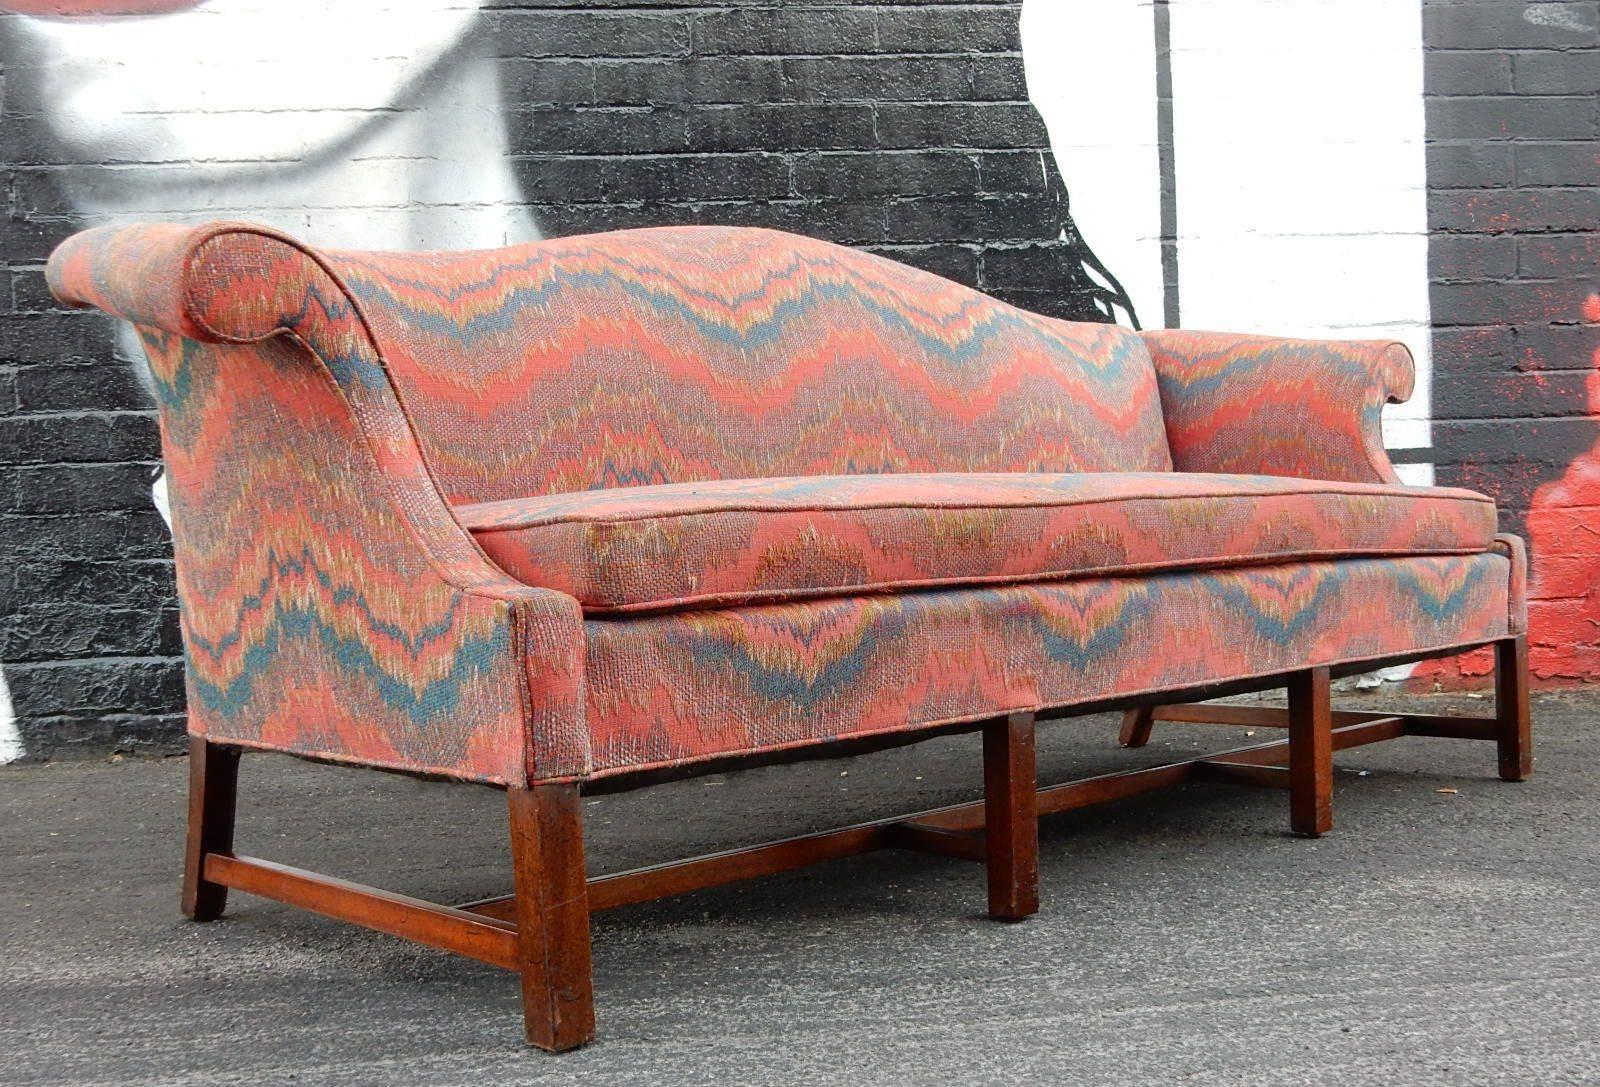 To-die-for antique Chippendale camelback sofa adroitly pattern match upholstered in a gorgeous Missoni inspired zig-zag fabric.
A functional piece of art furniture in immaculate condition. Solid with new premium foam seat cushion.